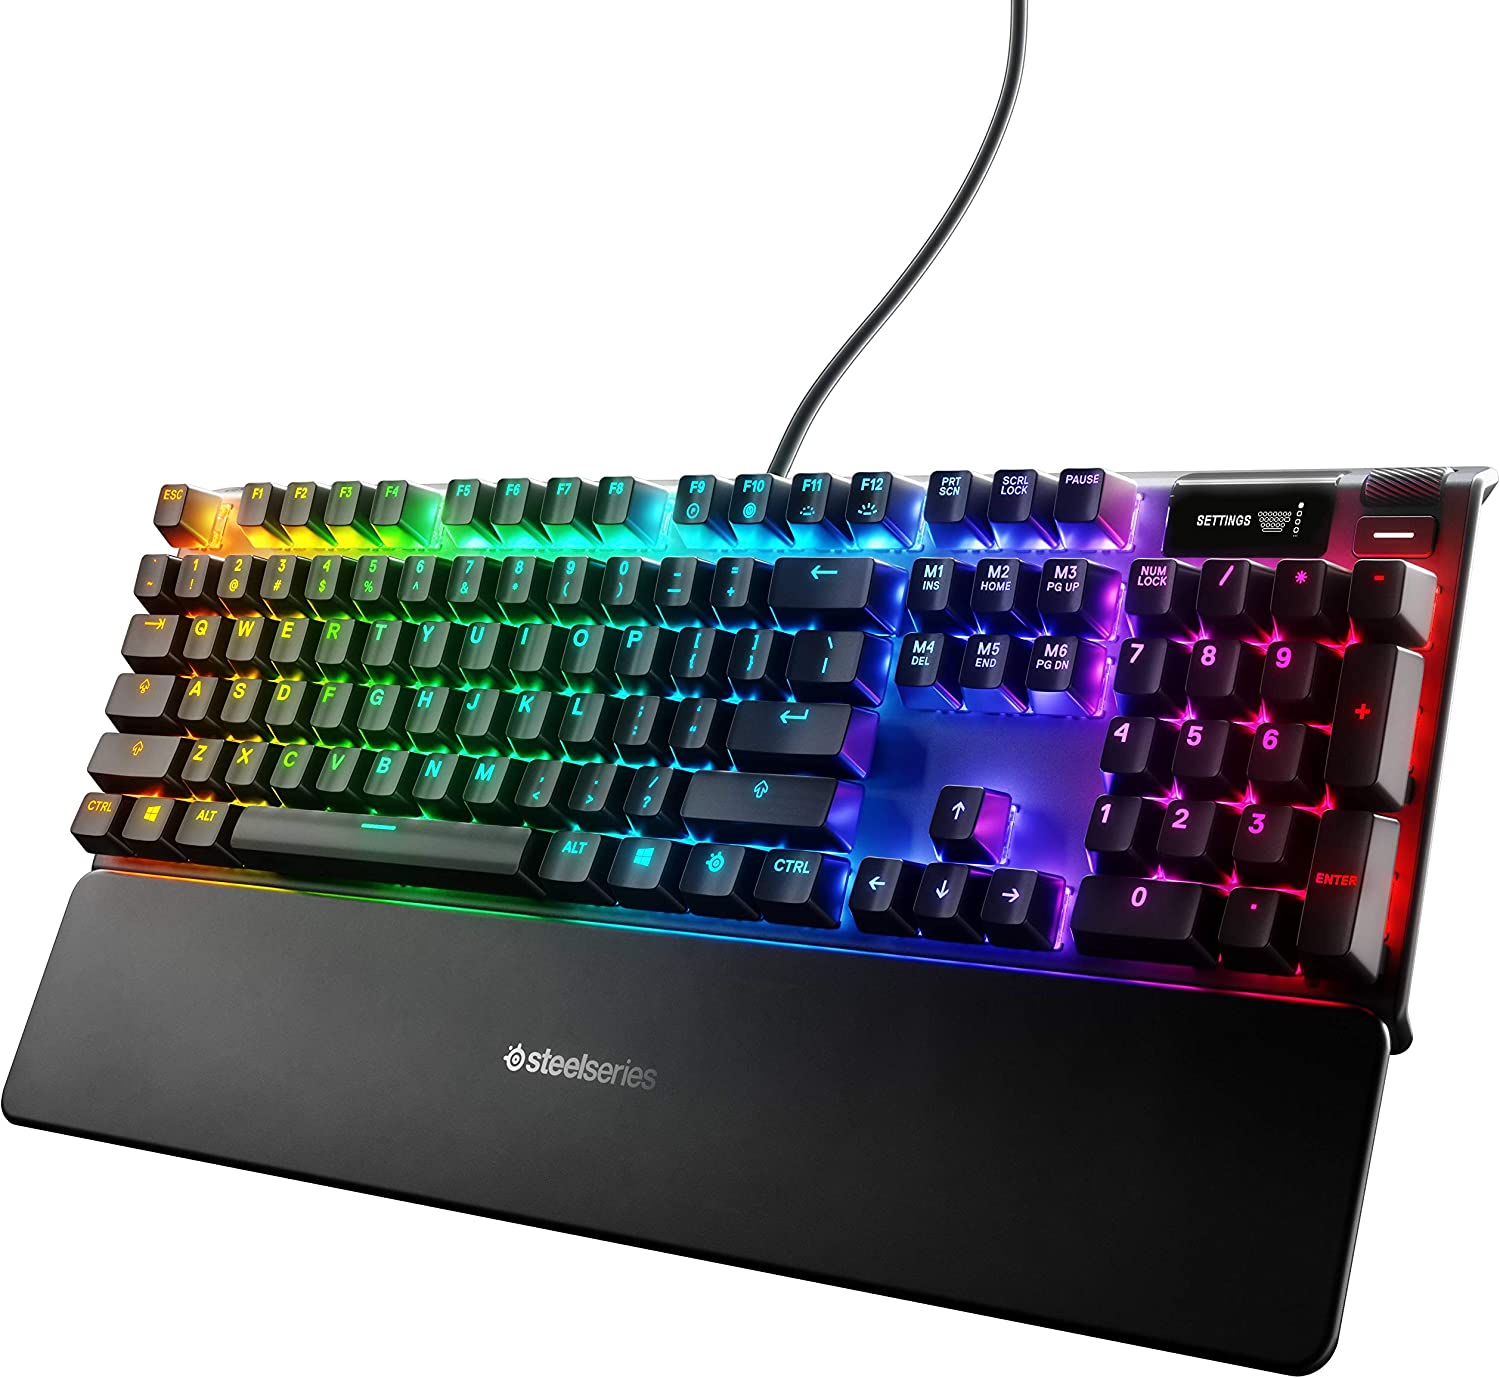 SteelSeries Apex 7 Mechanical Gaming Keyboard – OLED Smart Display – USB Passthrough and Media Controls – Tactile and Quiet – RGB Backlit (Brown Switch)